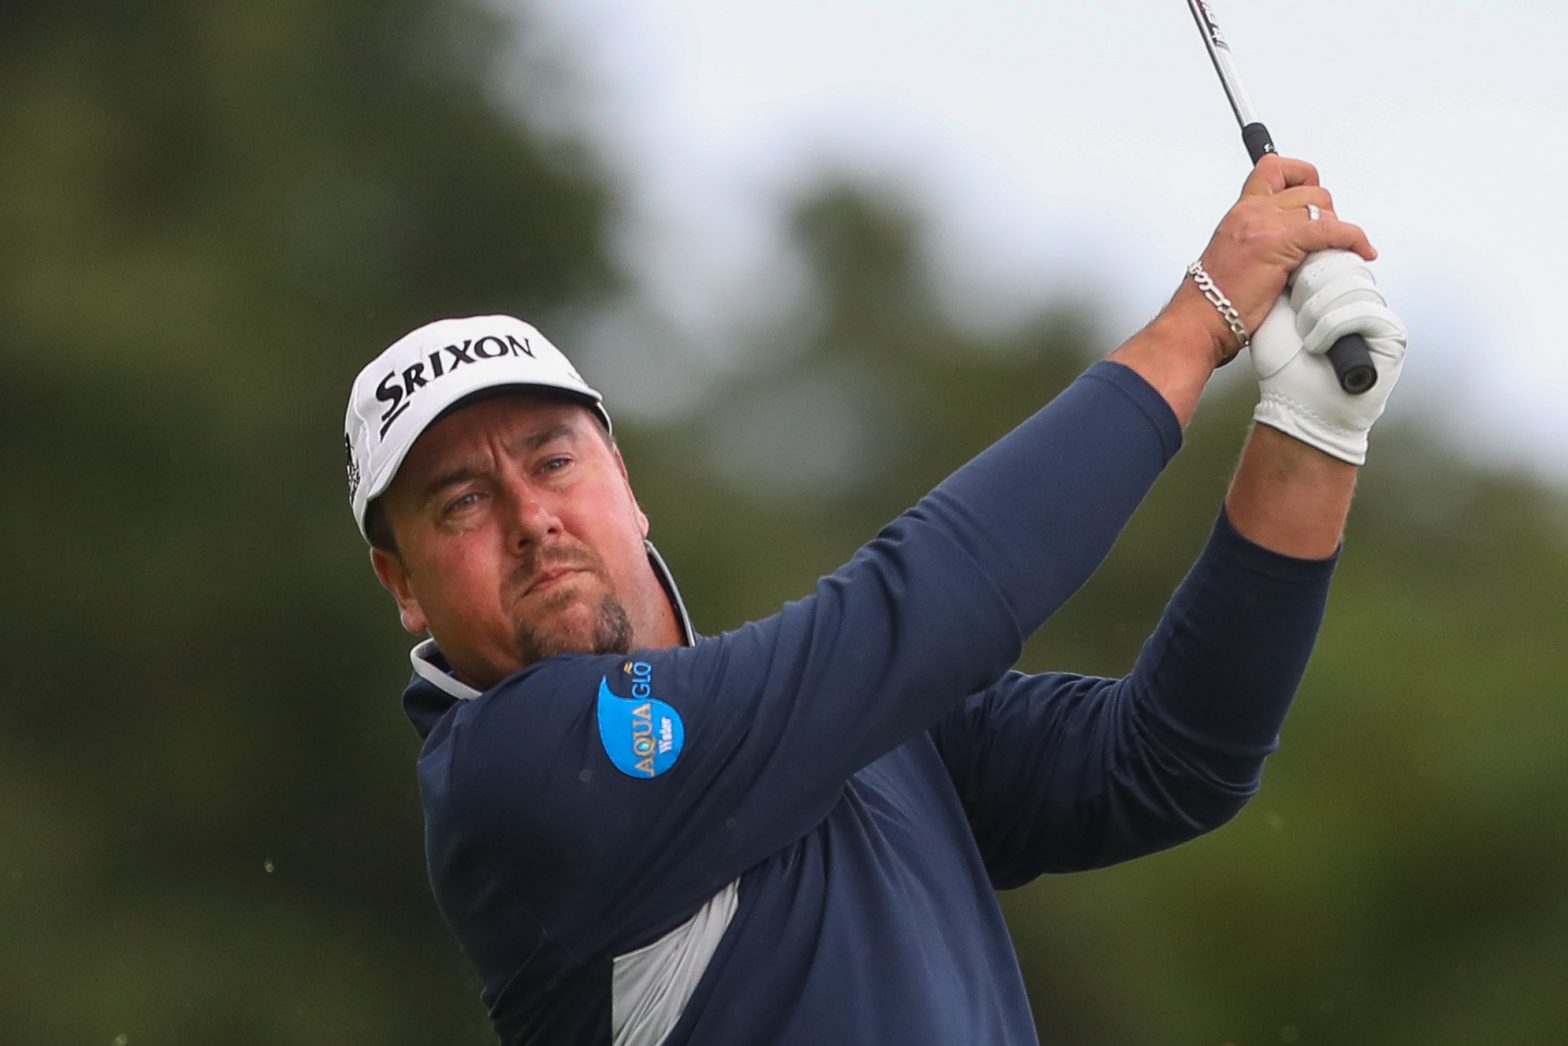 Ahlers chasing a place in Dimension Data Pro-Am history